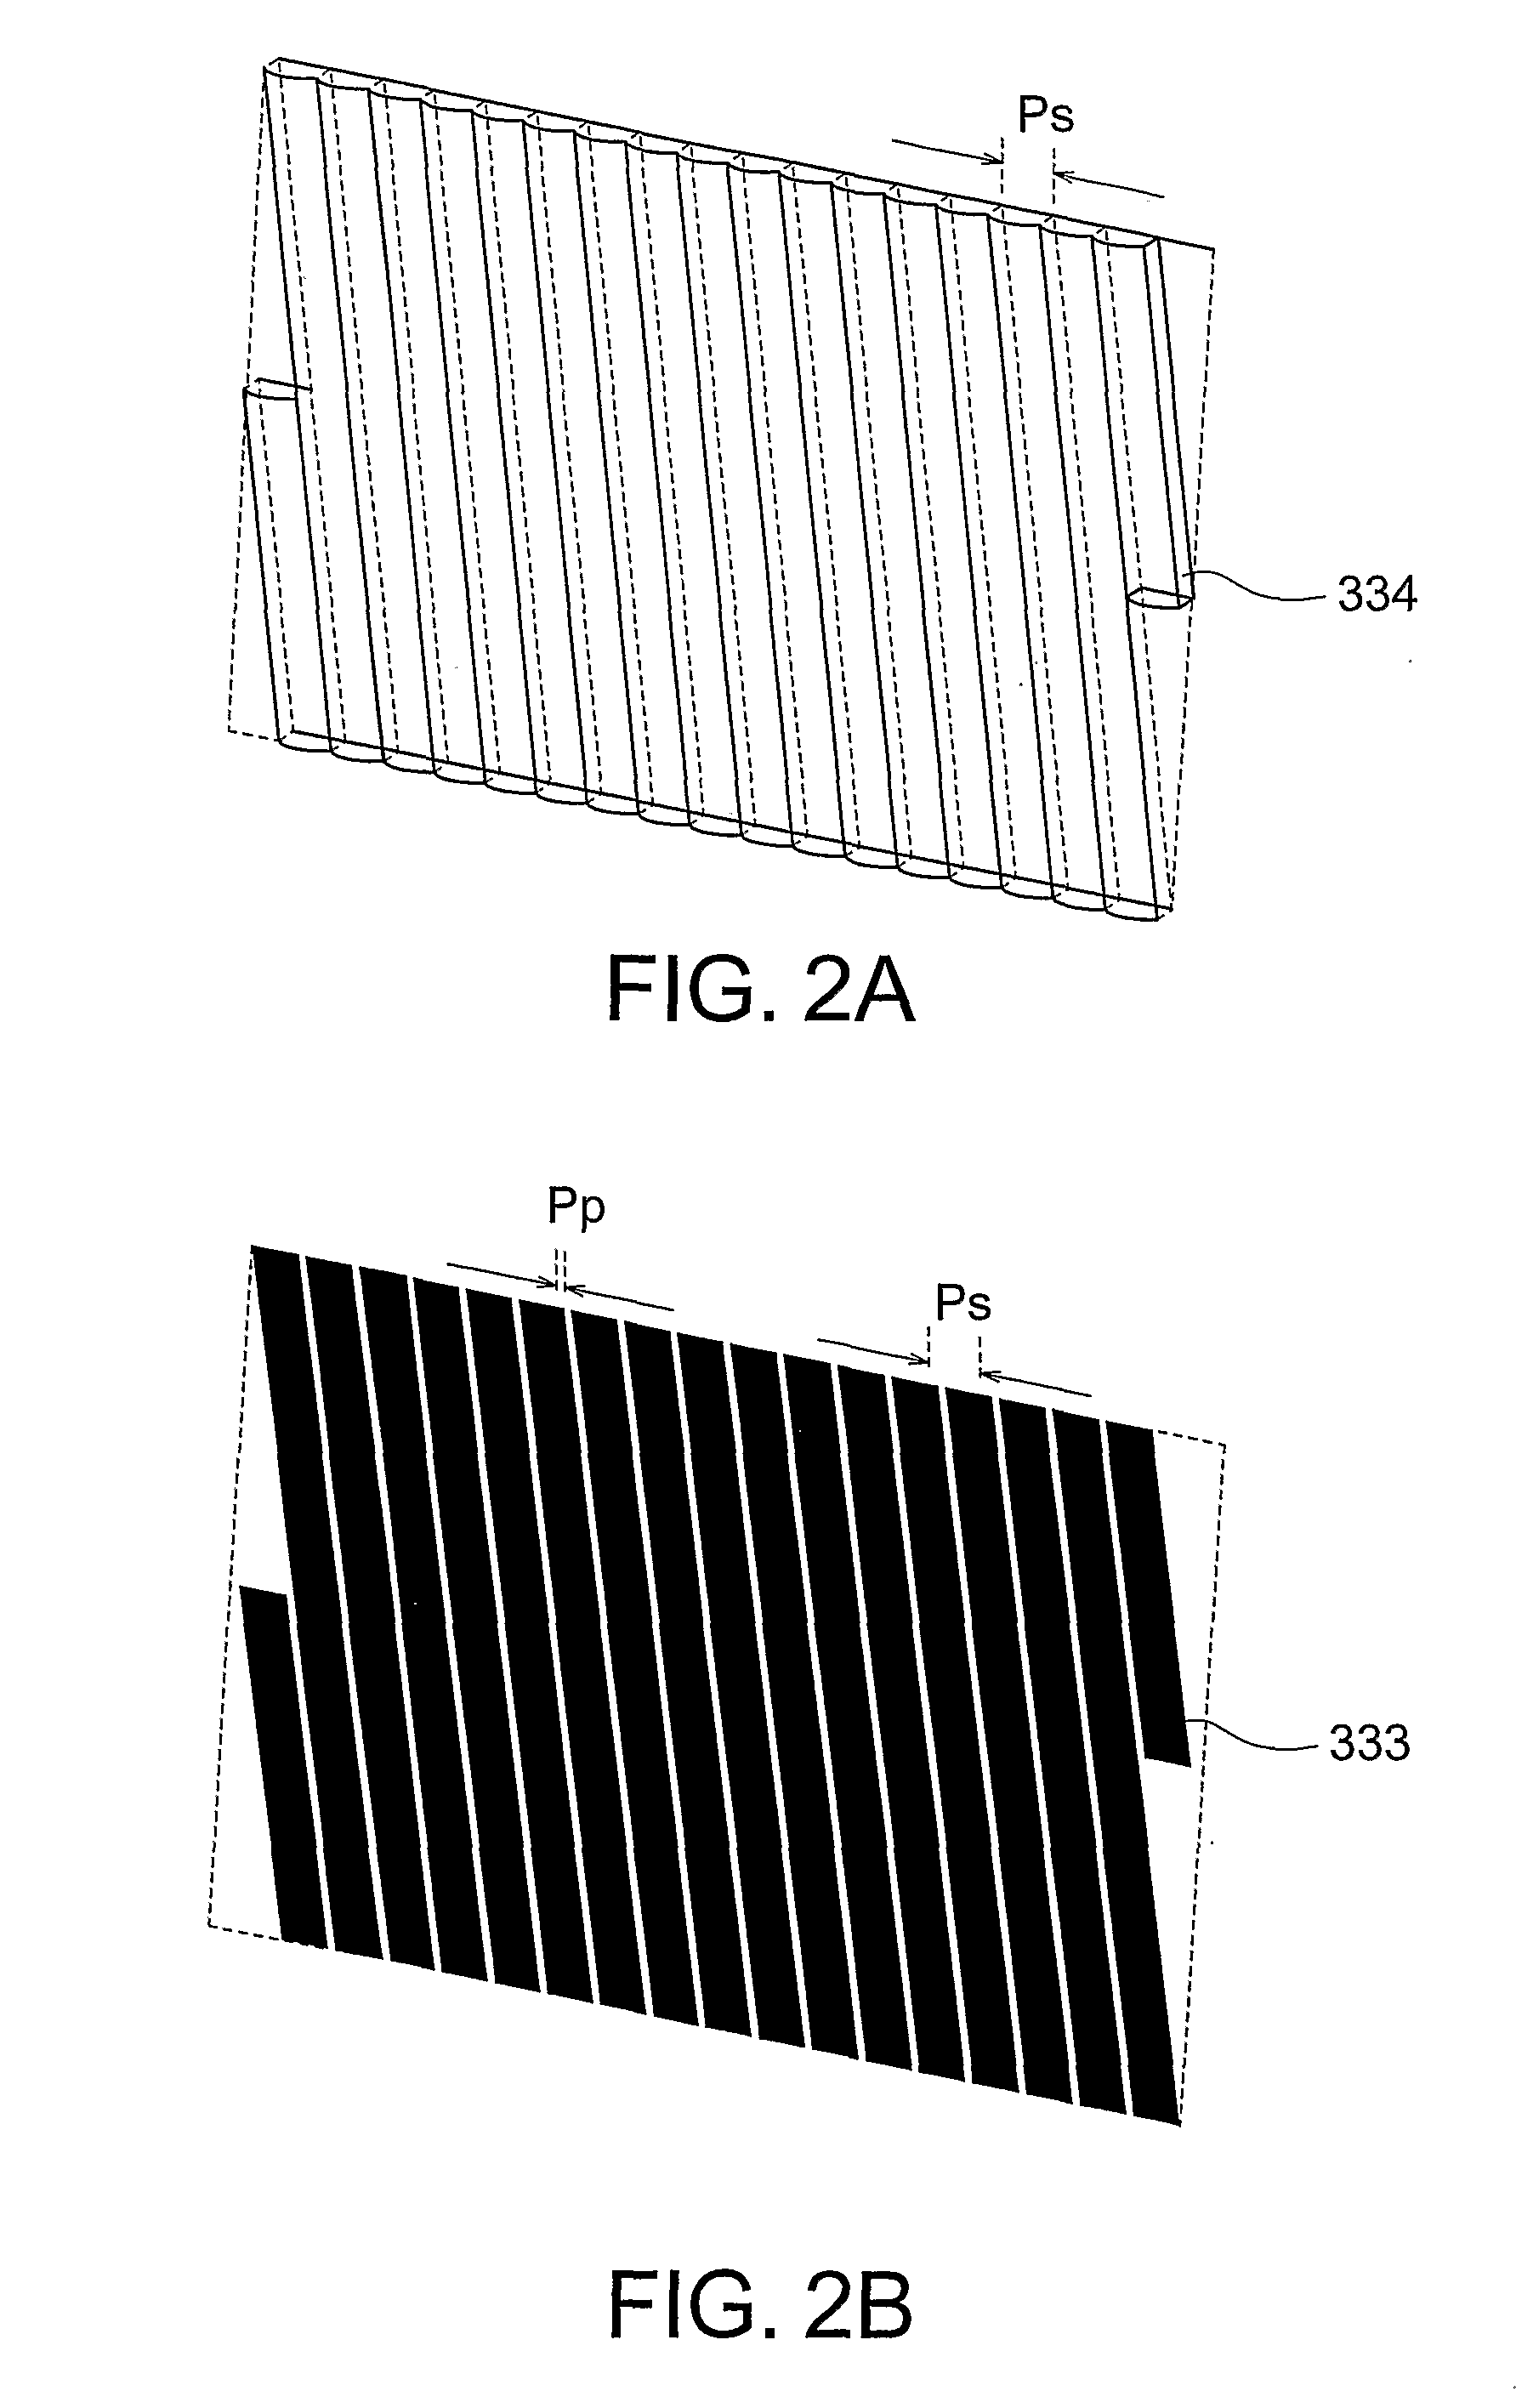 Structure of Stereoscopic Image Data, Stereoscopic Image Data Recording Method, Reproducing Method, Recording Program, and Reproducing Program